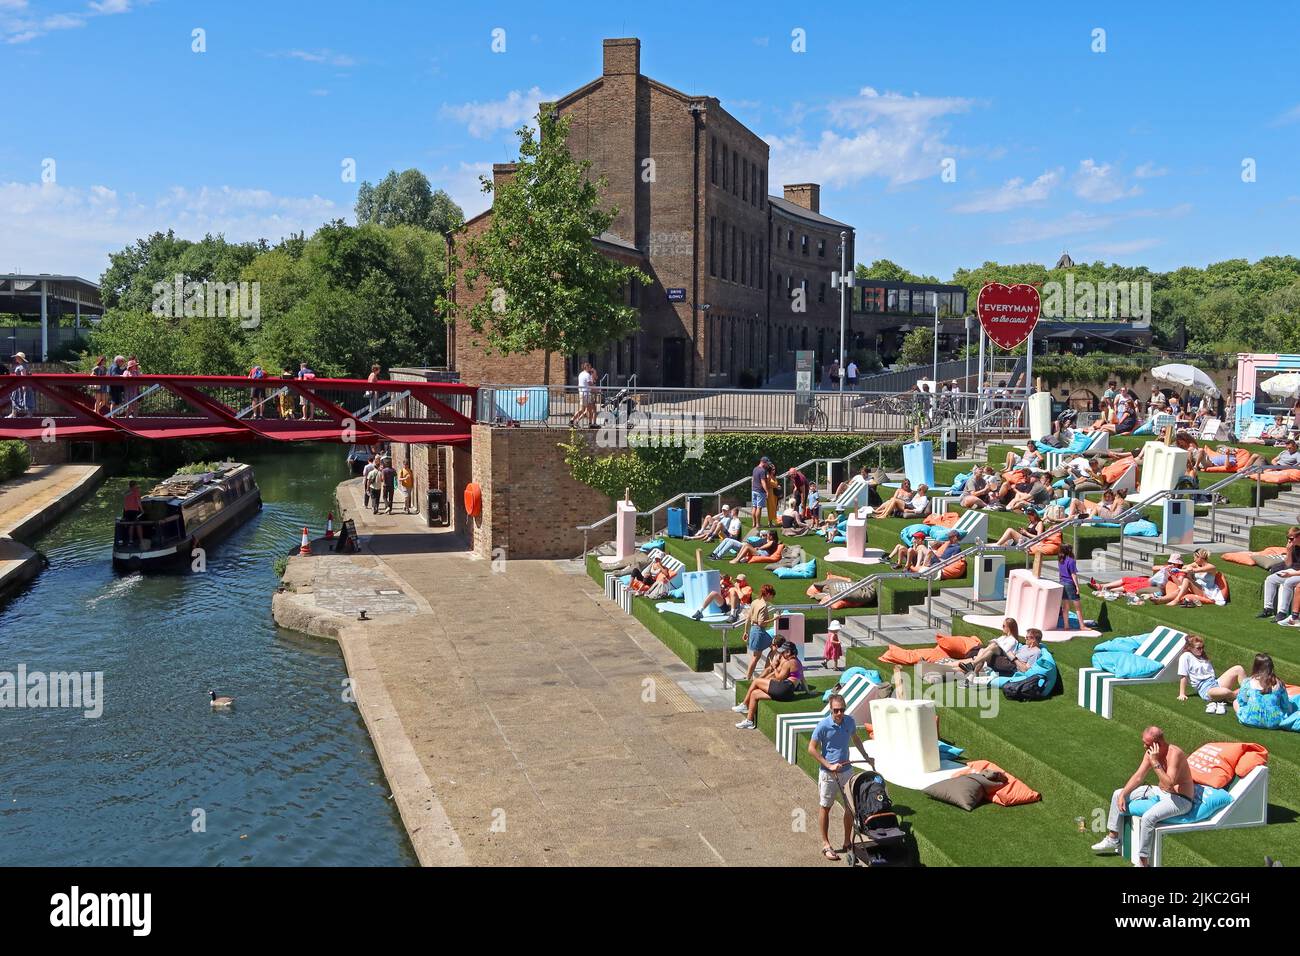 Everyman sur le canal, Granary Square, Coal Drops Yard , Kings Cross, Londres, Angleterre, Royaume-Uni, N1C 4AB Banque D'Images